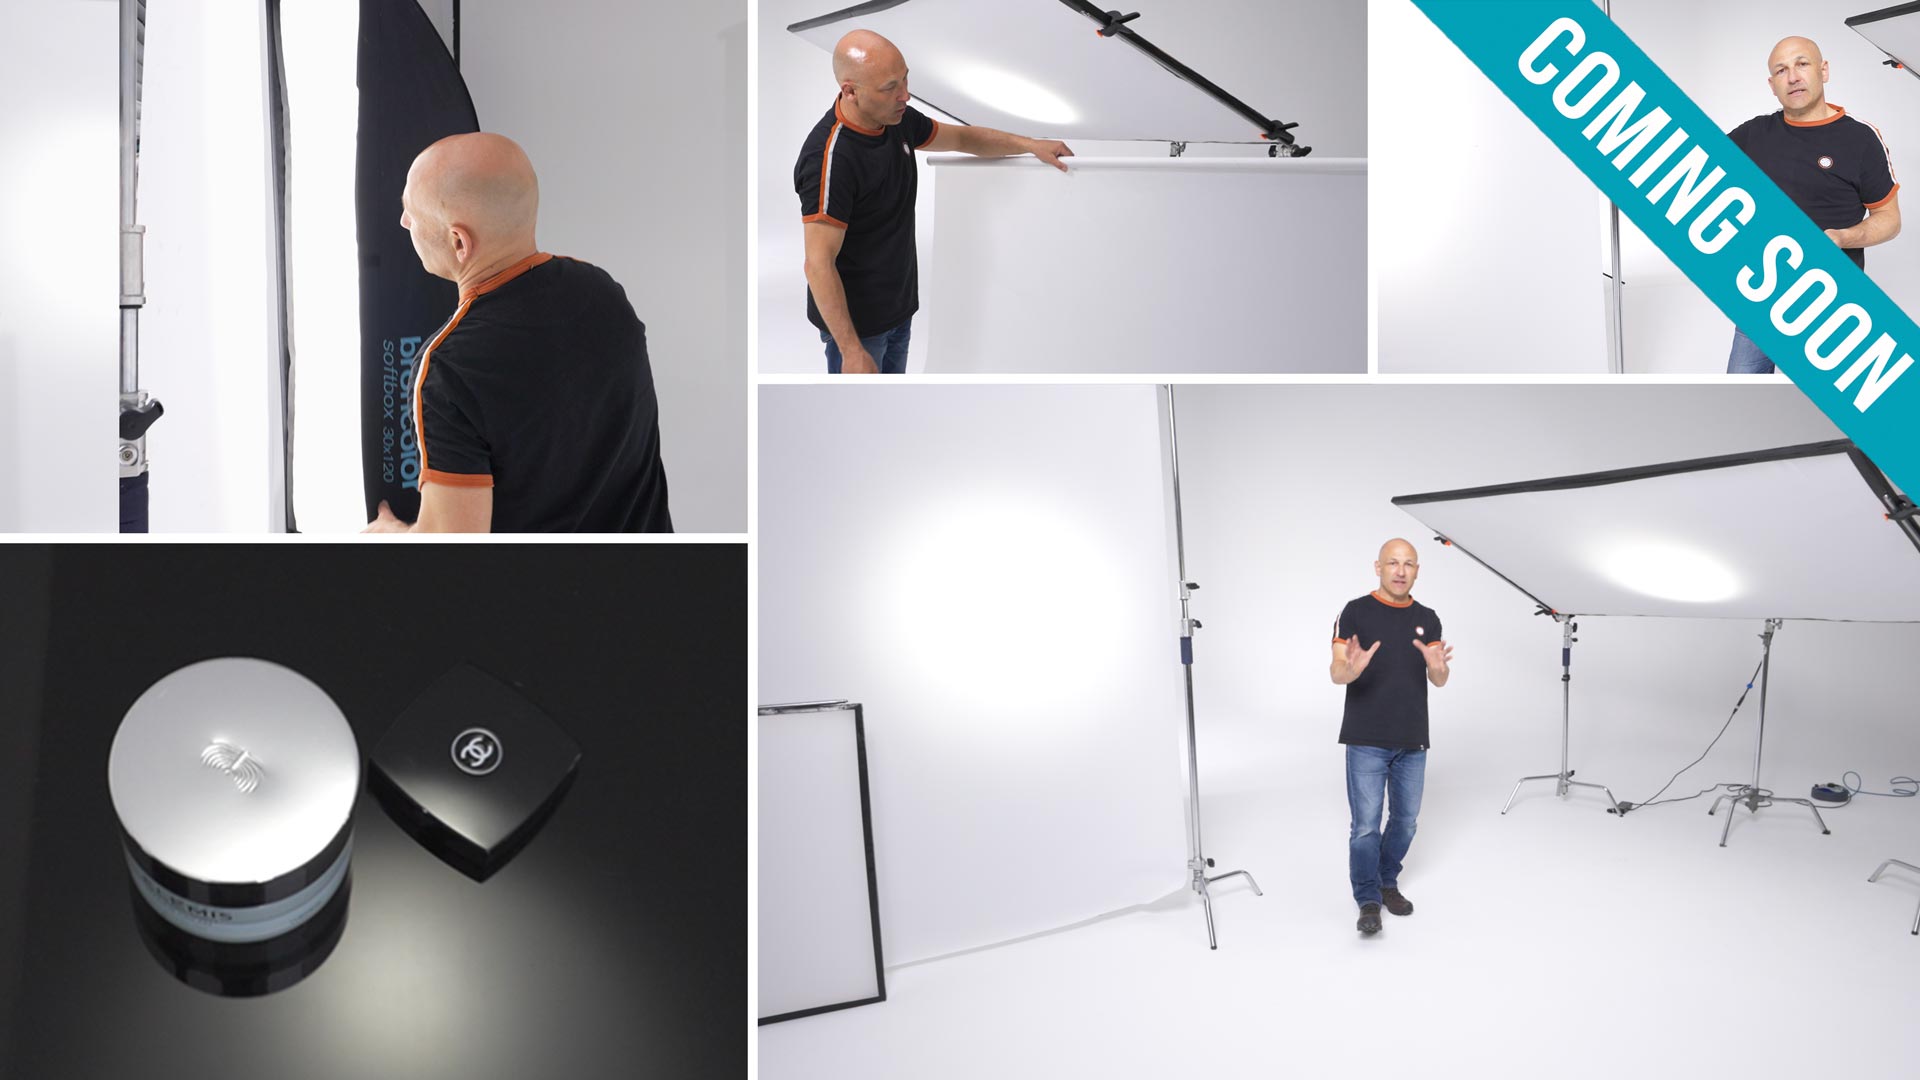 Gradient Lighting for Product Photography